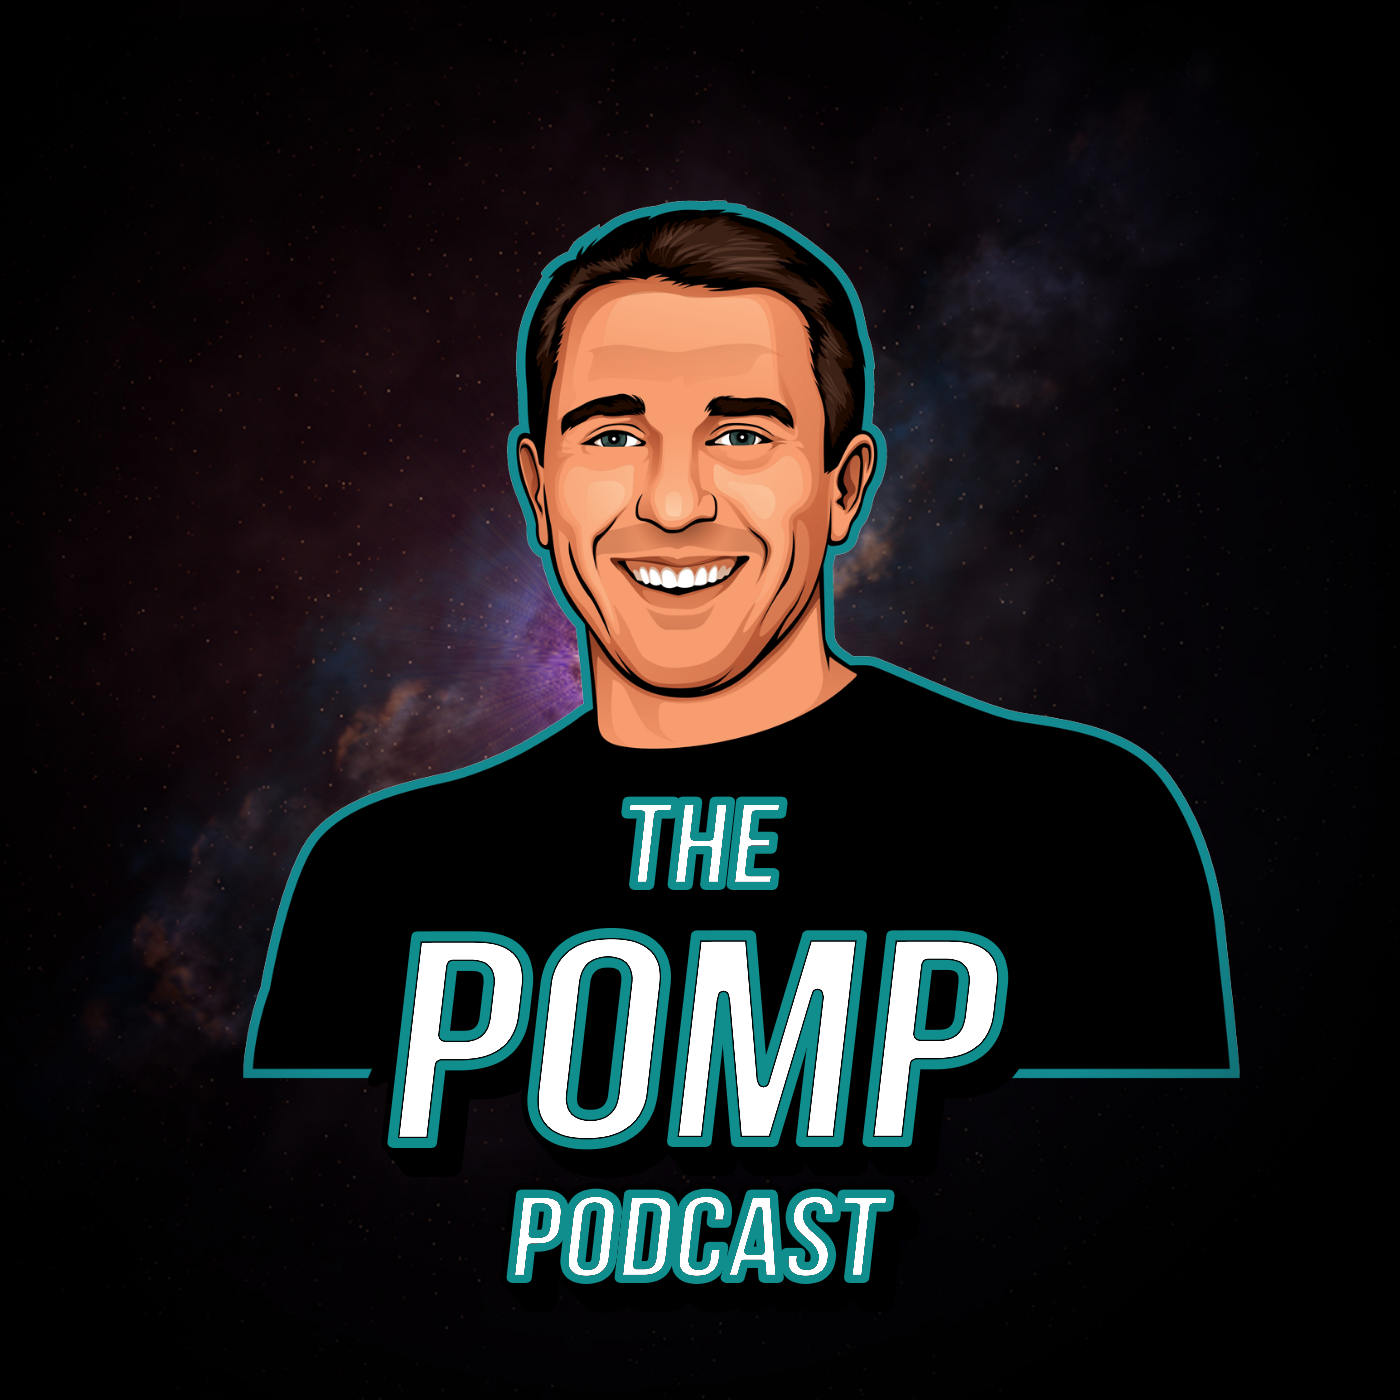 Pomp Podcast #363: Joe Pompliano on the Business and Money Behind Sports